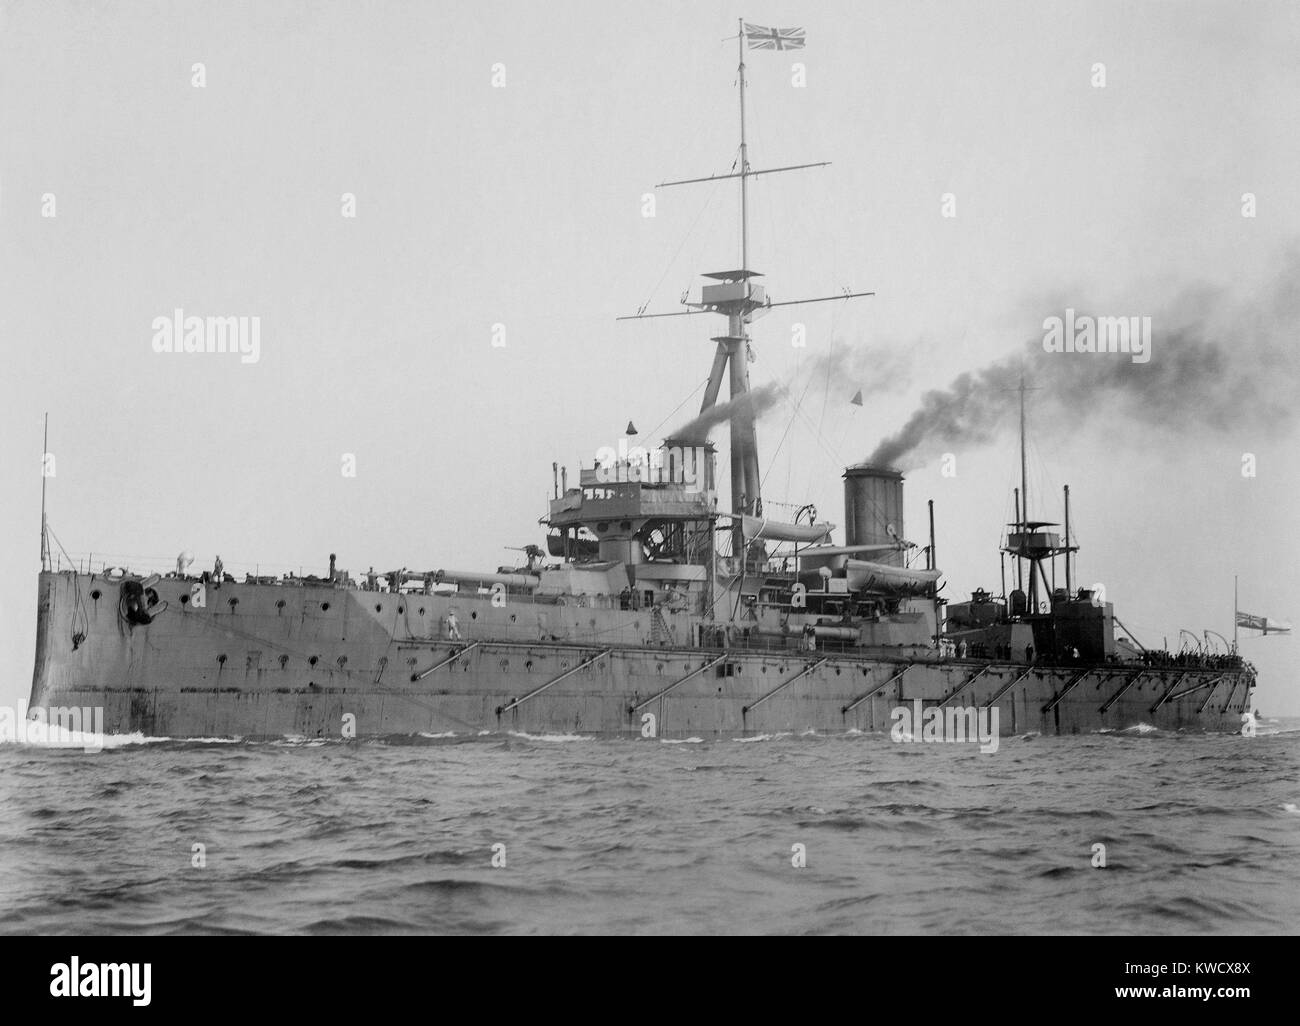 HMS Dreadnought, British battleship whose design revolutionized naval power, 1906. She had a turreted main battery of big guns, was powered by steam turbines, had heavy armor protecting the central turrets and magazine below (BSLOC 2017 2 91) Stock Photo